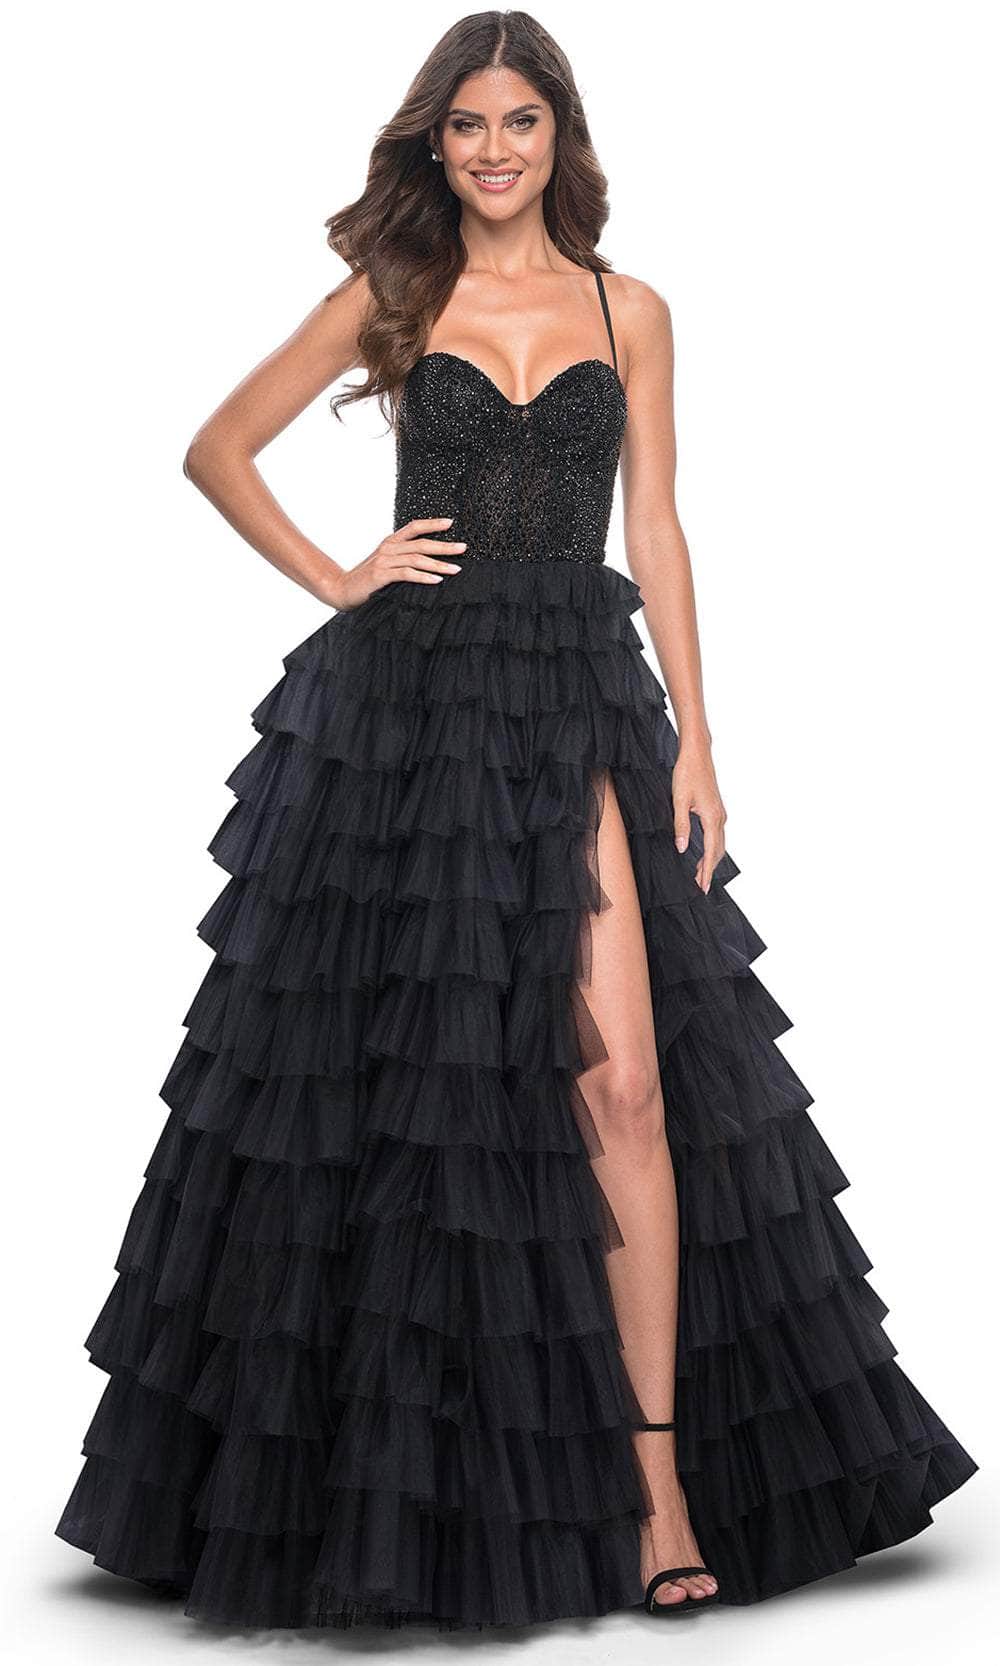 Image of La Femme 32002 - Sweetheart Beaded Top Prom Gown